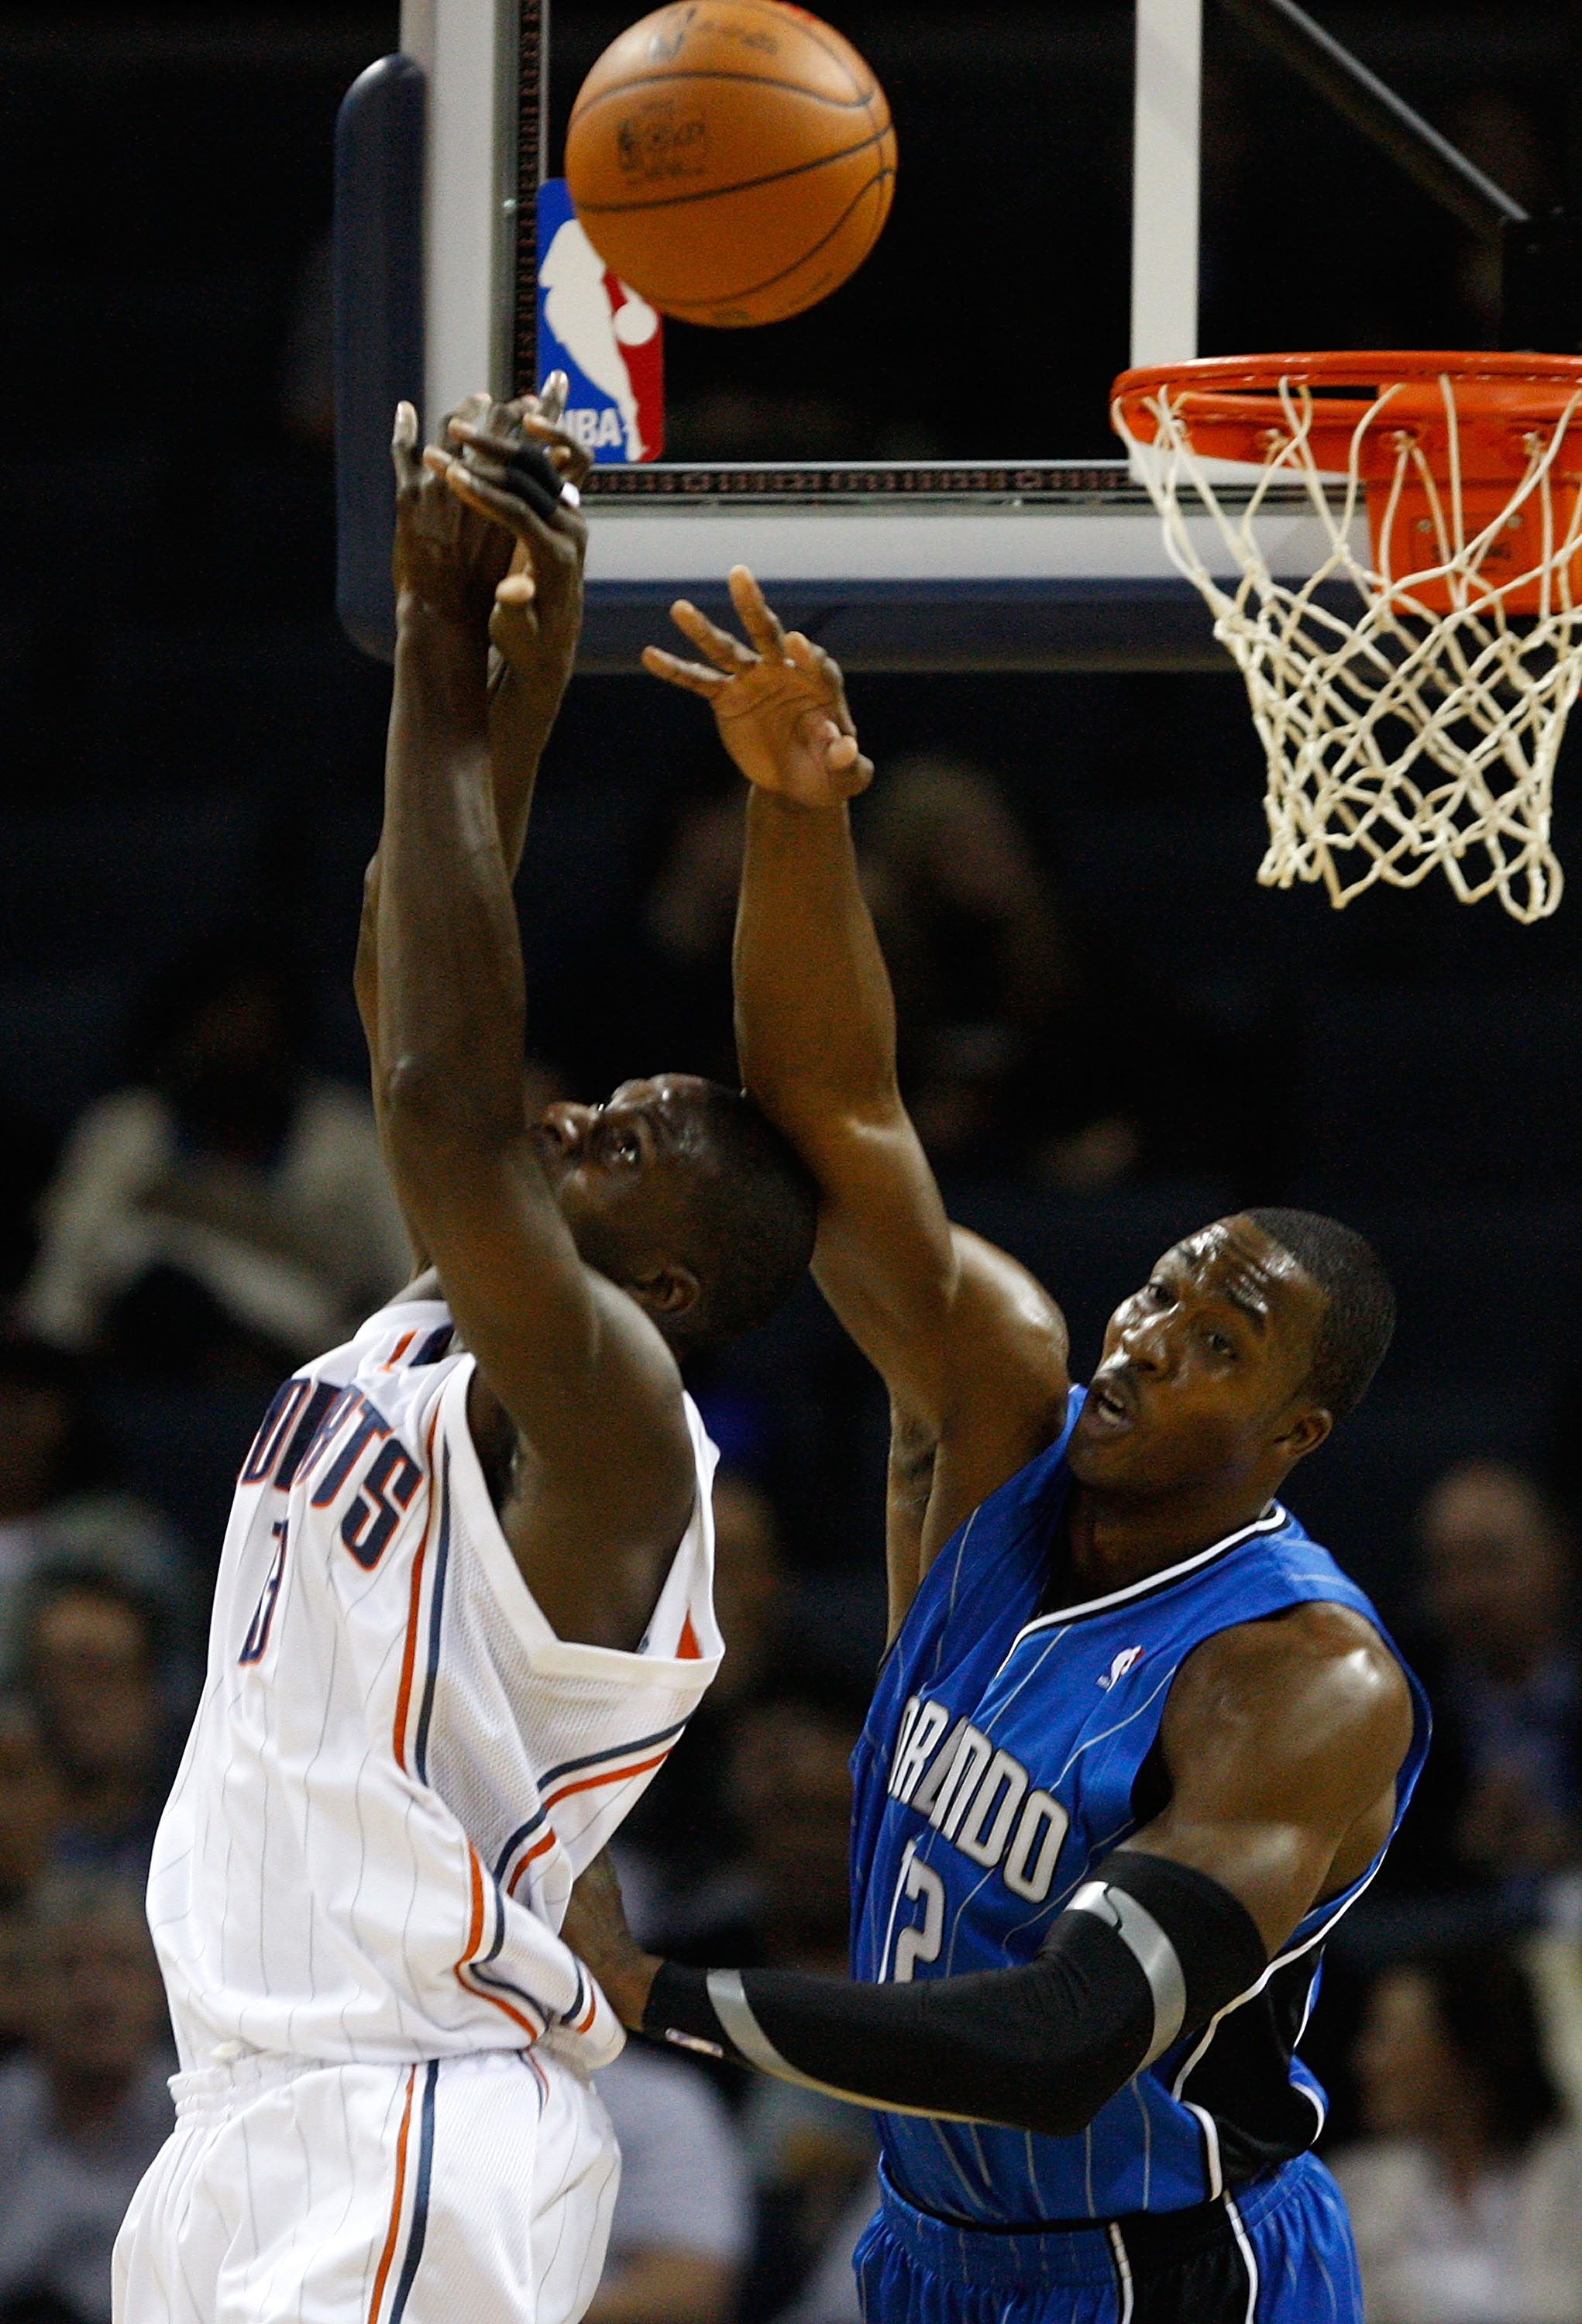 CHARLOTTE, NC - NOVEMBER 10:  Dwight Howard #12 of the Orlando Magic knocks the ball away from Nazr Mohammed #13 of the Charlotte Bobcats during their game at Time Warner Cable Arena on November 10, 2009 in Charlotte, North Carolina.  (Photo by Streeter L